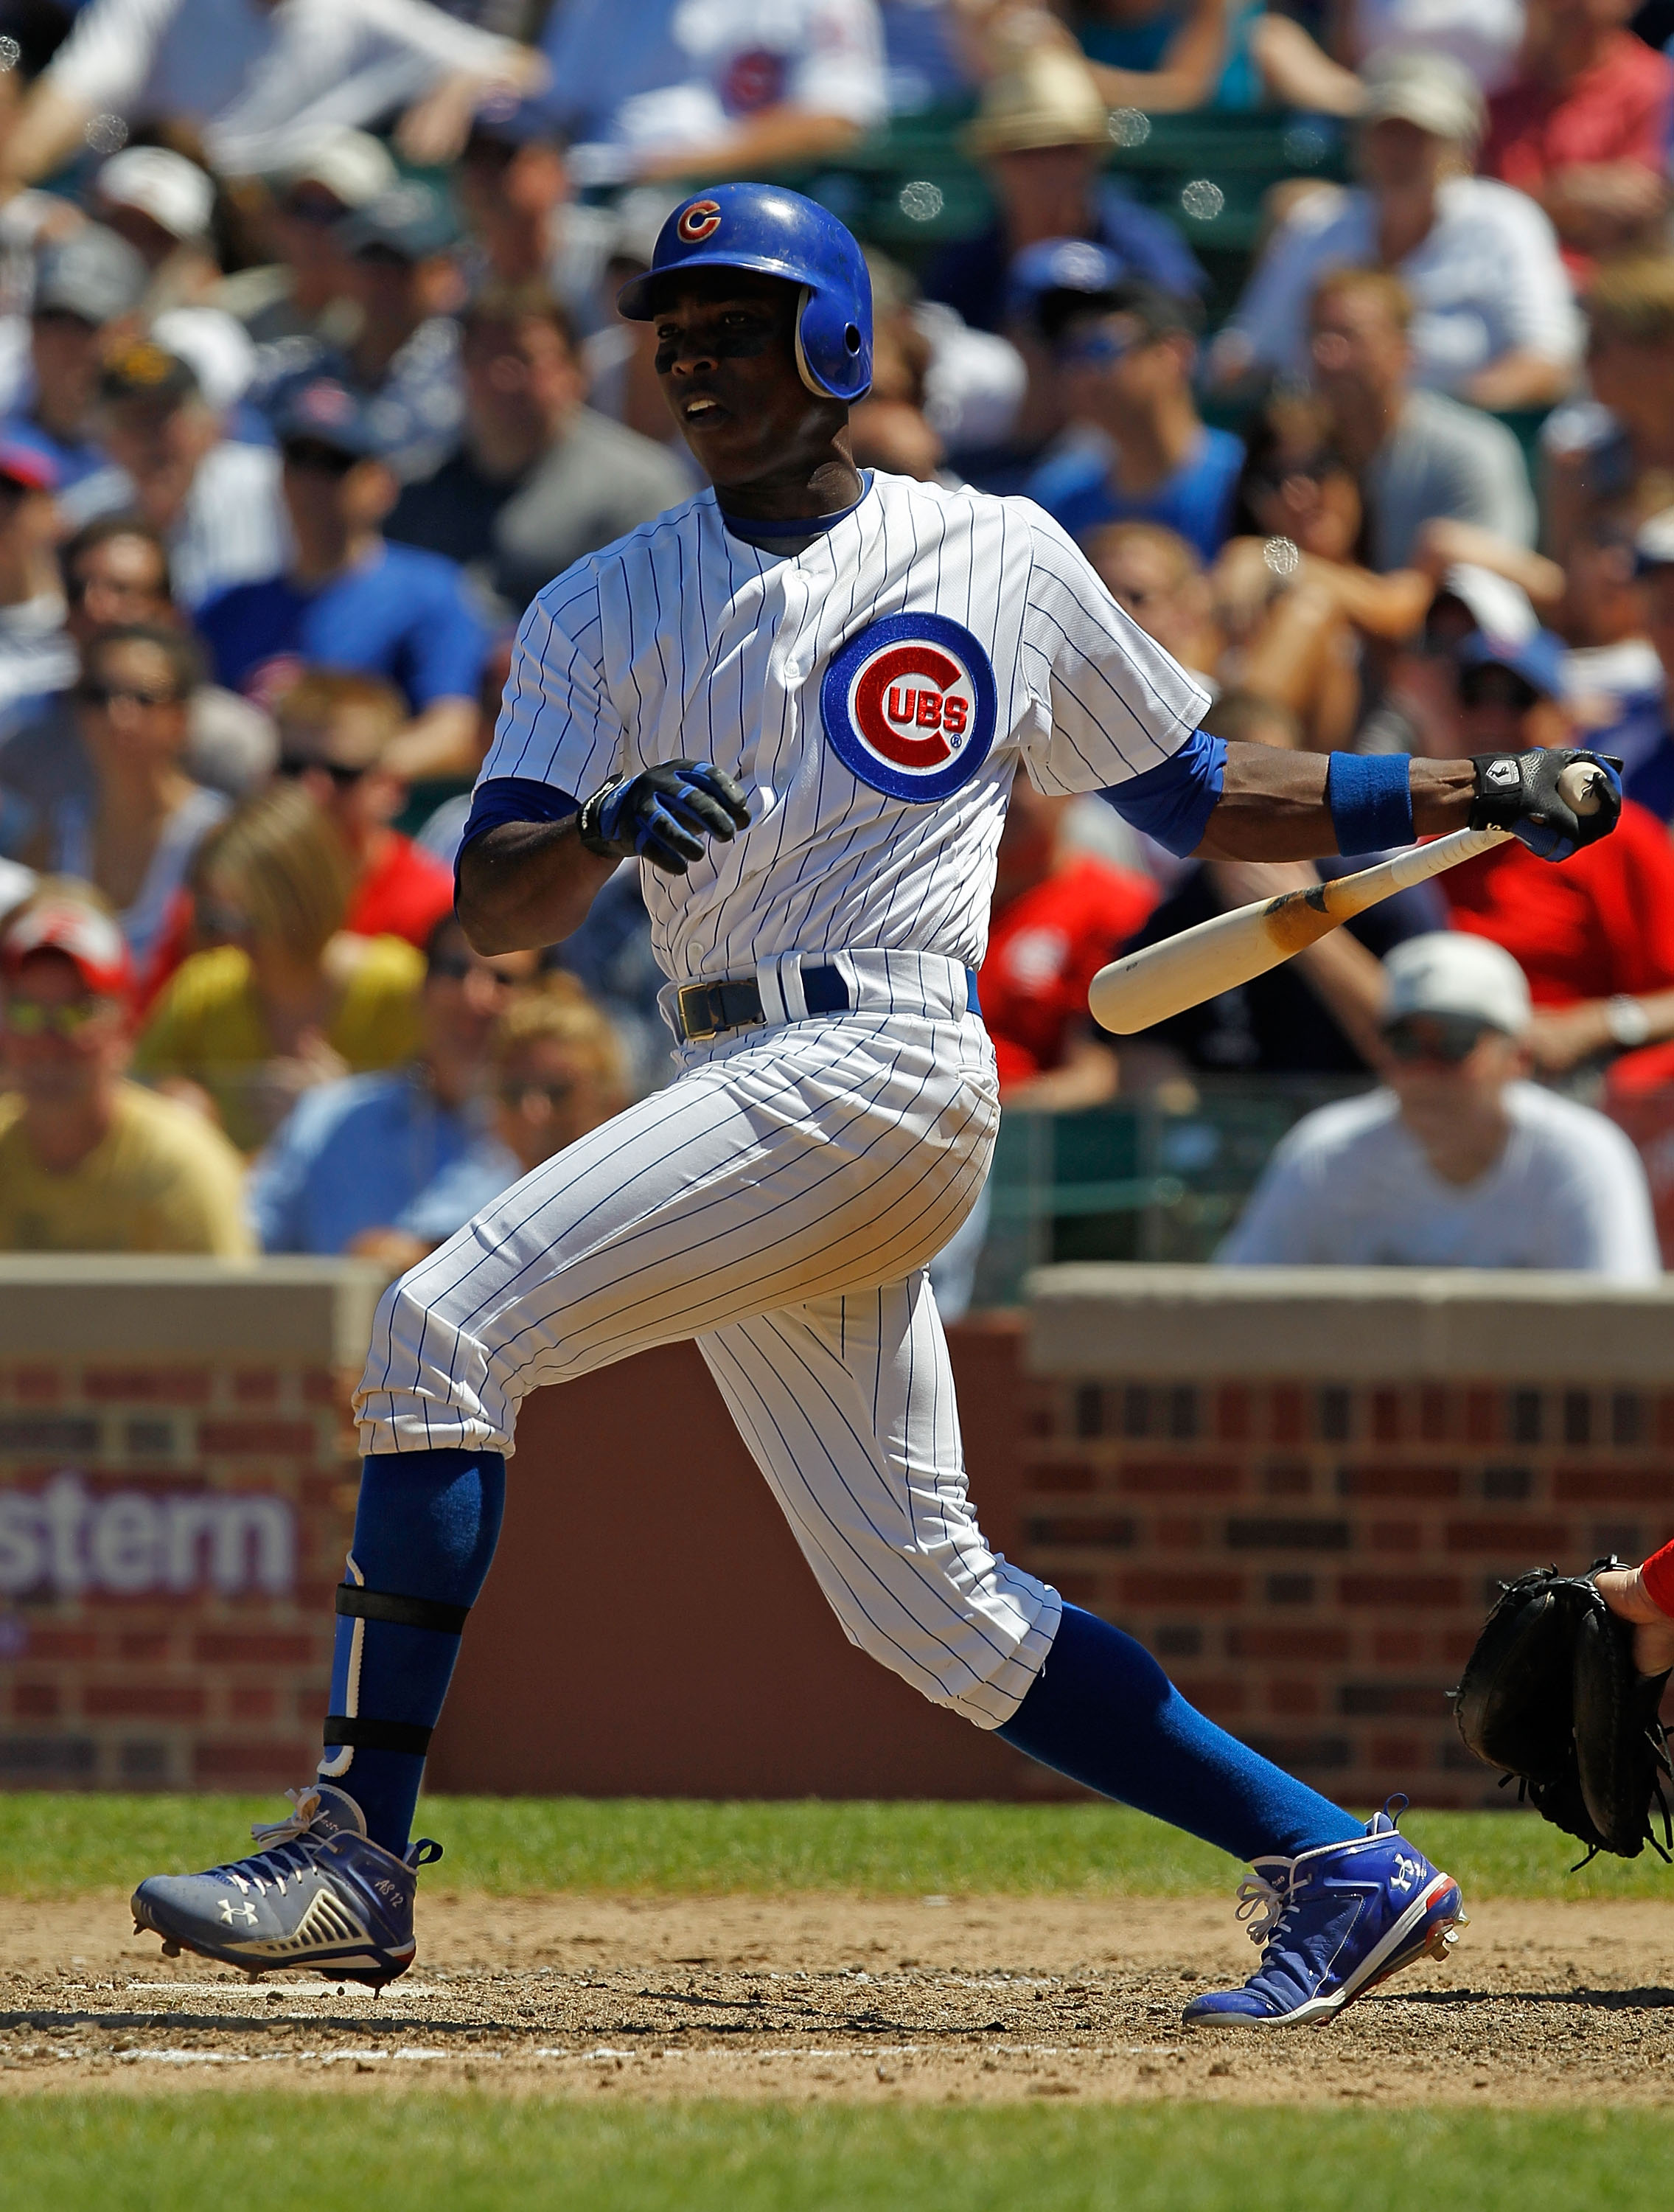 CHICAGO - JULY 03: Alfonso Soriano #12 of the Chicago Cubs hits the ball against the Cincinnati Reds at Wrigley Field on July 3, 2010 in Chicago, Illinois. The Cubs defeated the Reds 3-1. (Photo by Jonathan Daniel/Getty Images)